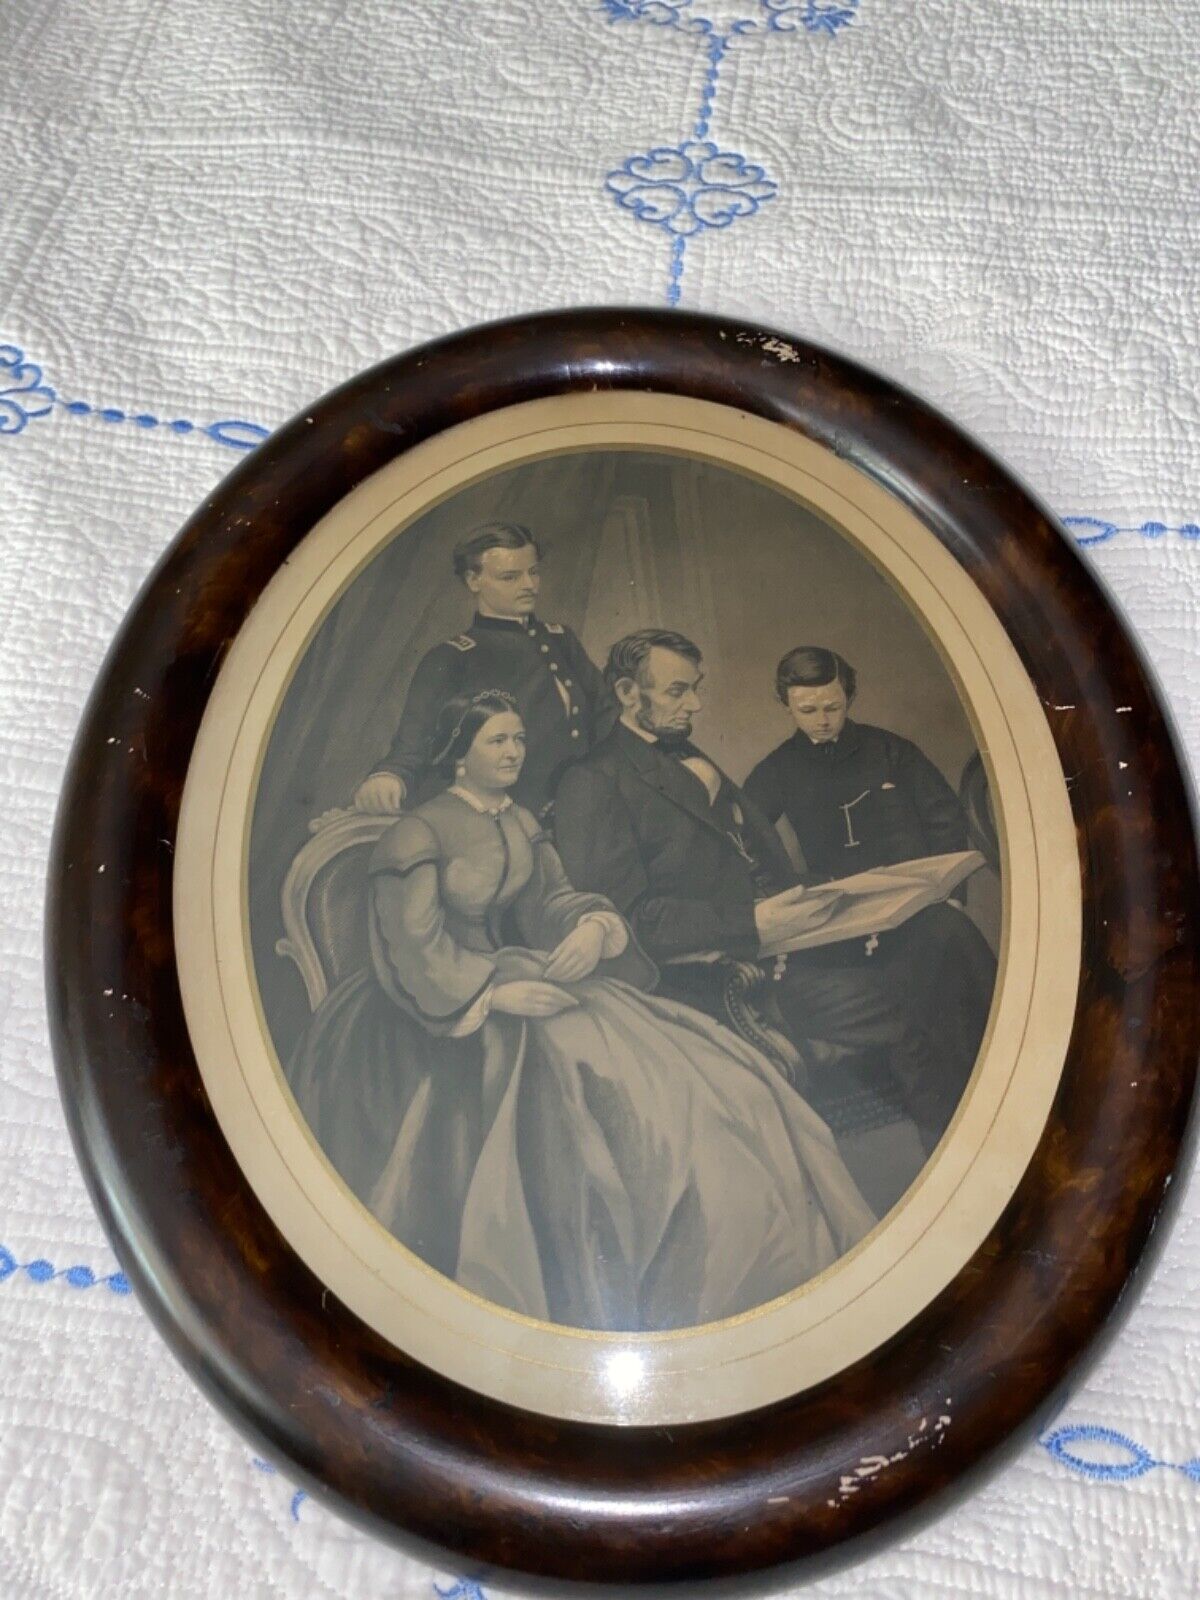 COLLECTIBLE 1863 ANTIQUE LITHOGRAPH OF PRESIDENT ABRAHAM LINCOLN AND FAMILY